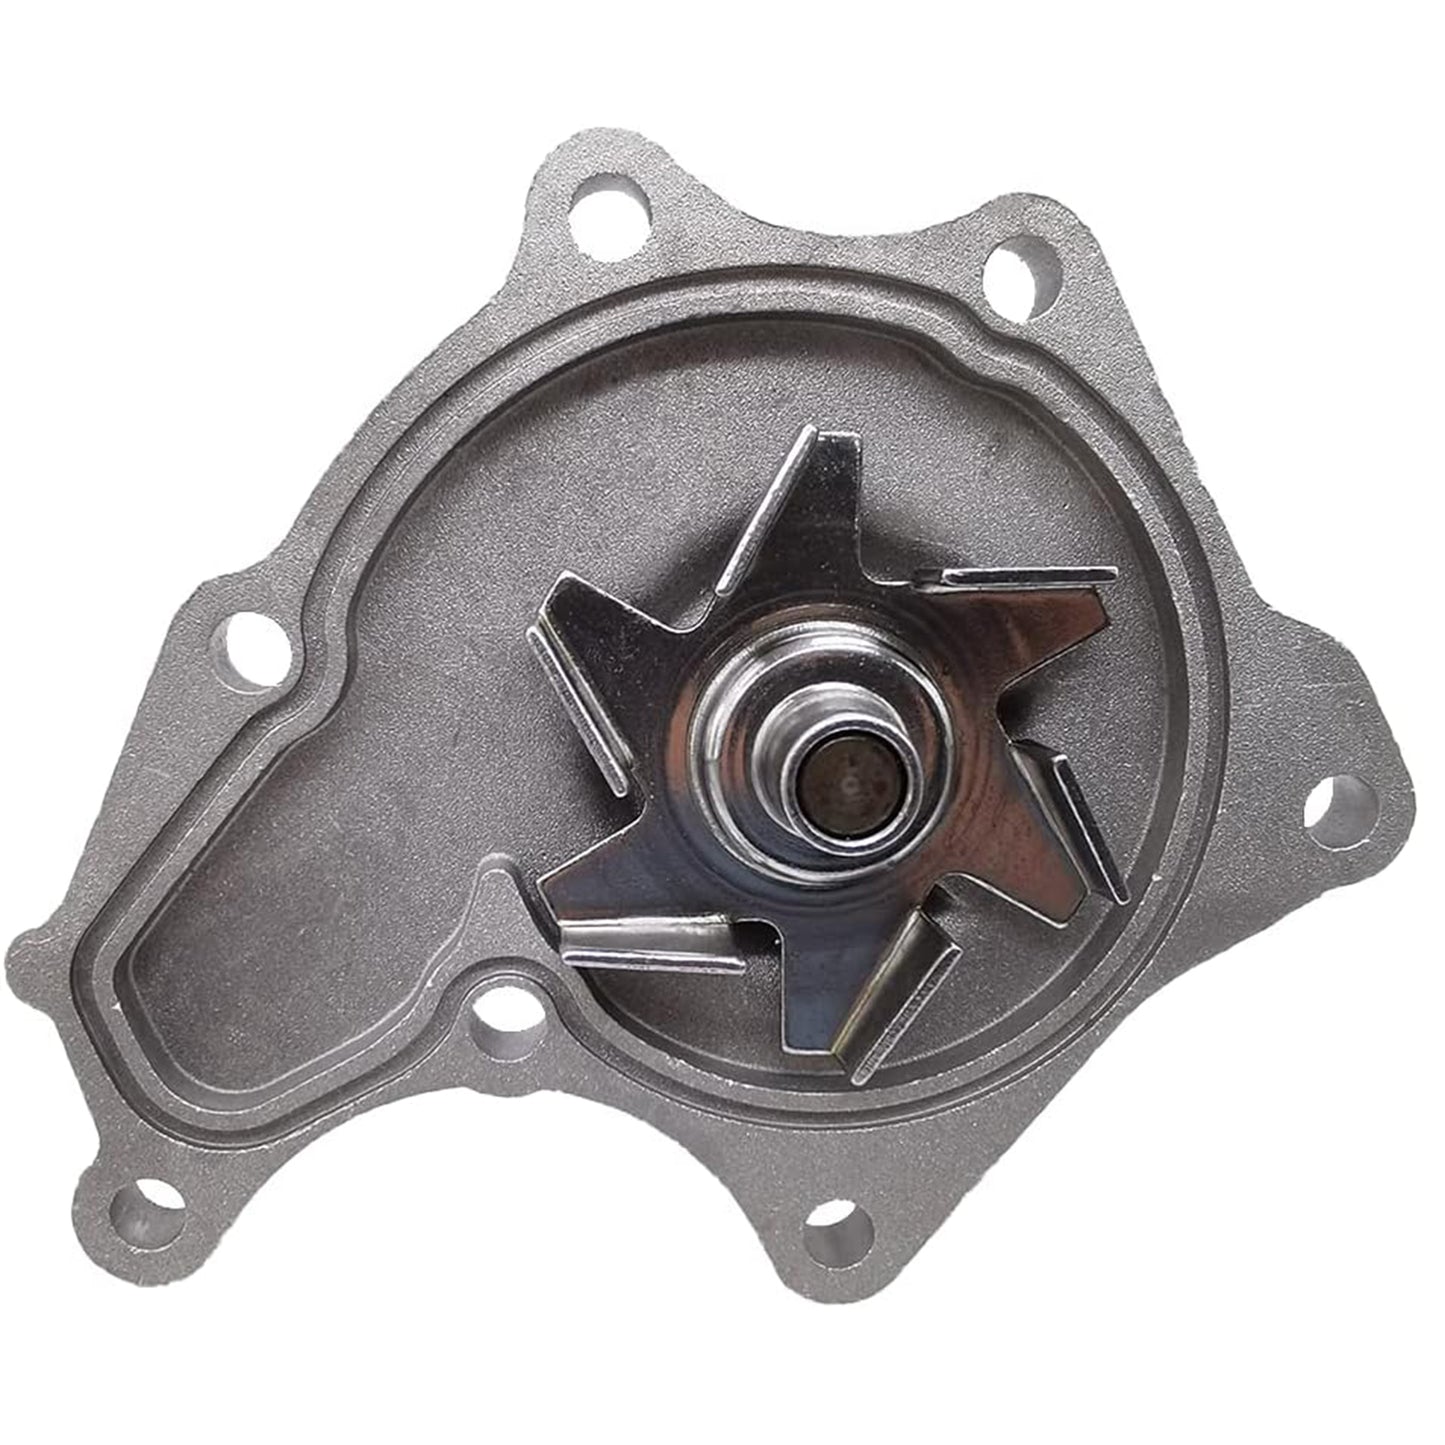 6671508 6631810 Water Pump Compatible With Isuzu Bobcat 853 and Later 843 Skid Steers